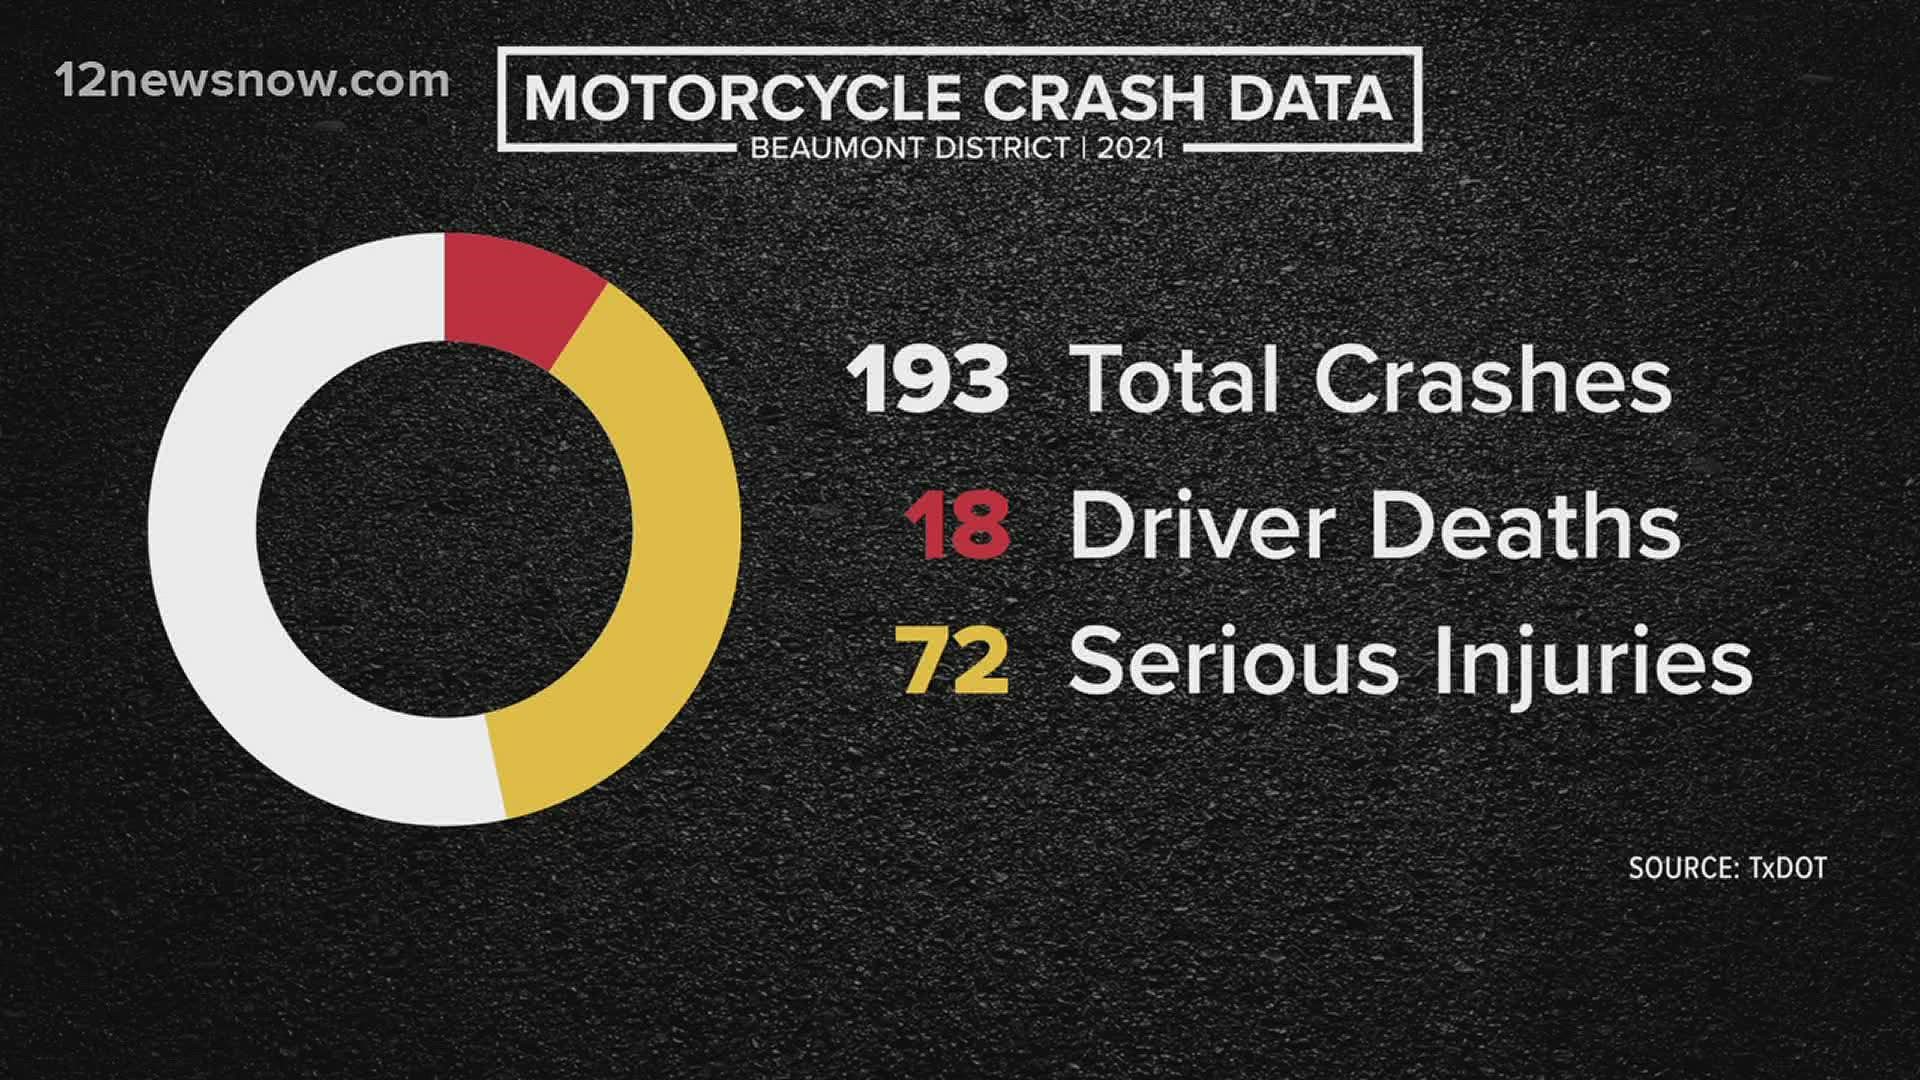 With a recent uptick in motorcycle fatalities, advocates of motorcycle safety are making a plea to the community to watch where they are going.